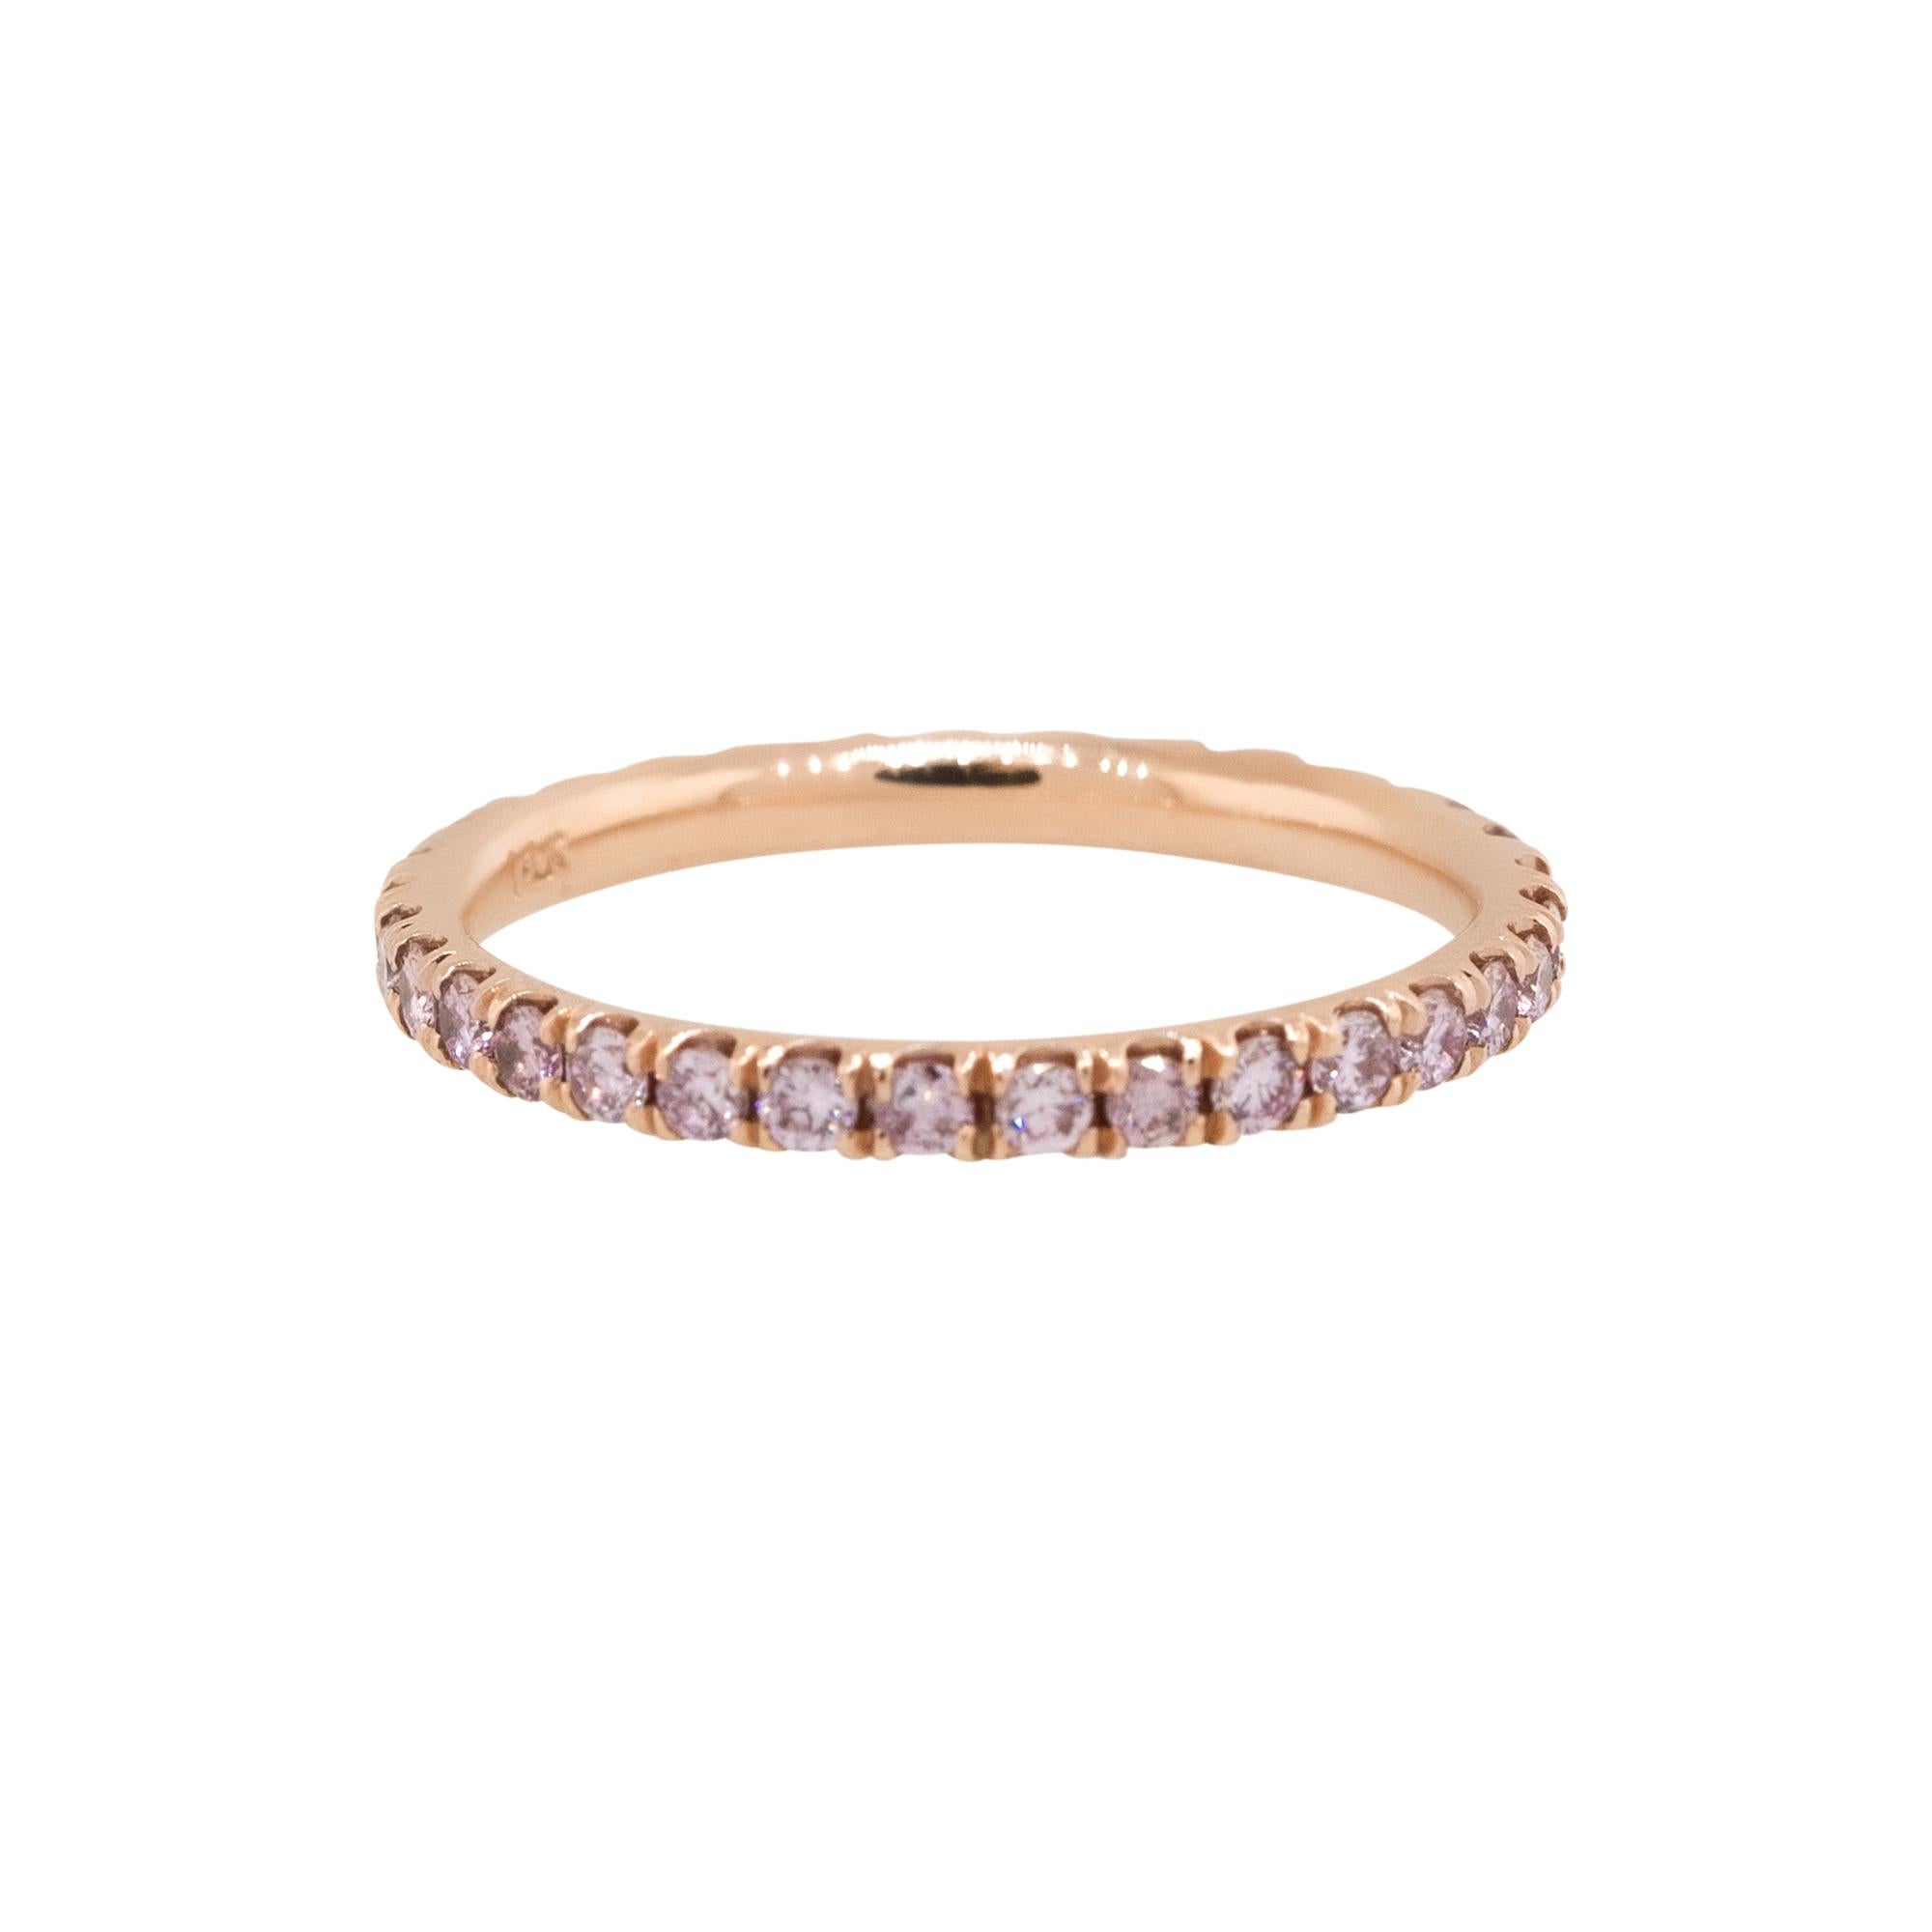 Material: 14k Rose Gold
Diamond Details: Approx. 0.59ctw of round brilliant Pink Diamonds. Diamonds are G/H in color and VS in clarity
Size: 5.25
Measurements: 19mm x 2mm x 19mm
Weight: 1.4g (0.9dwt)
Additional Details: This item comes with a